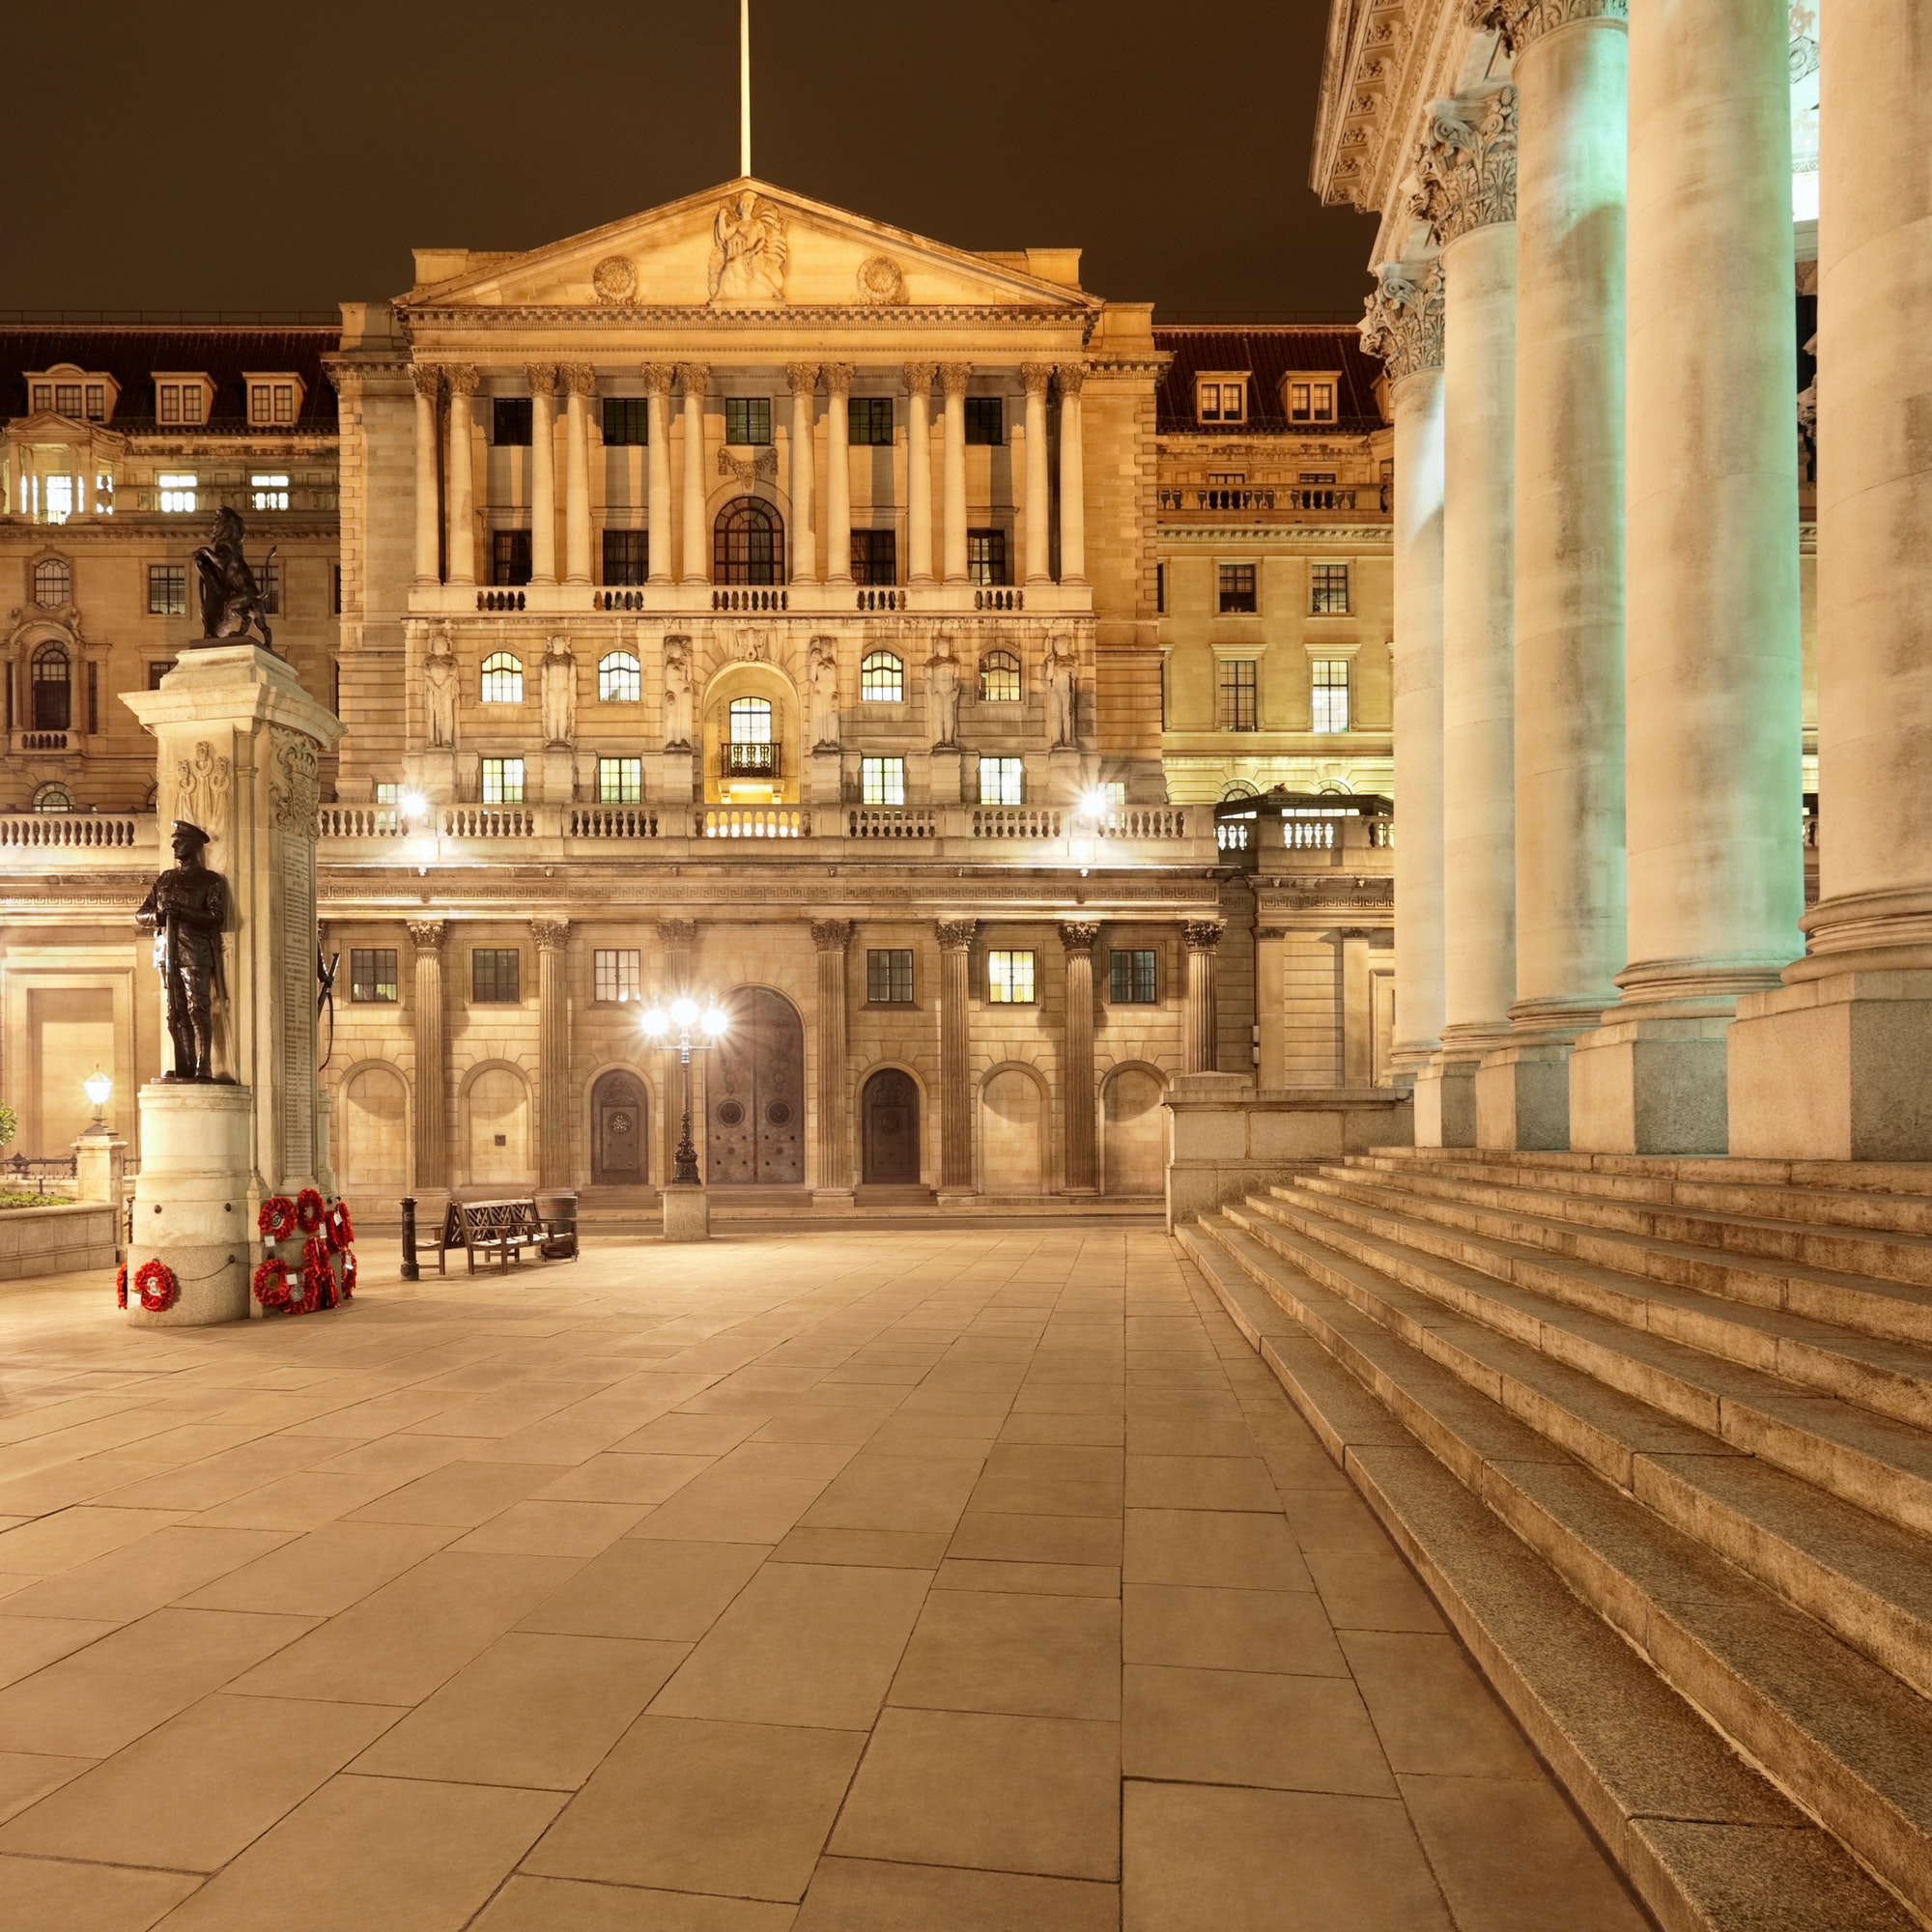 Bank of England lit up at night